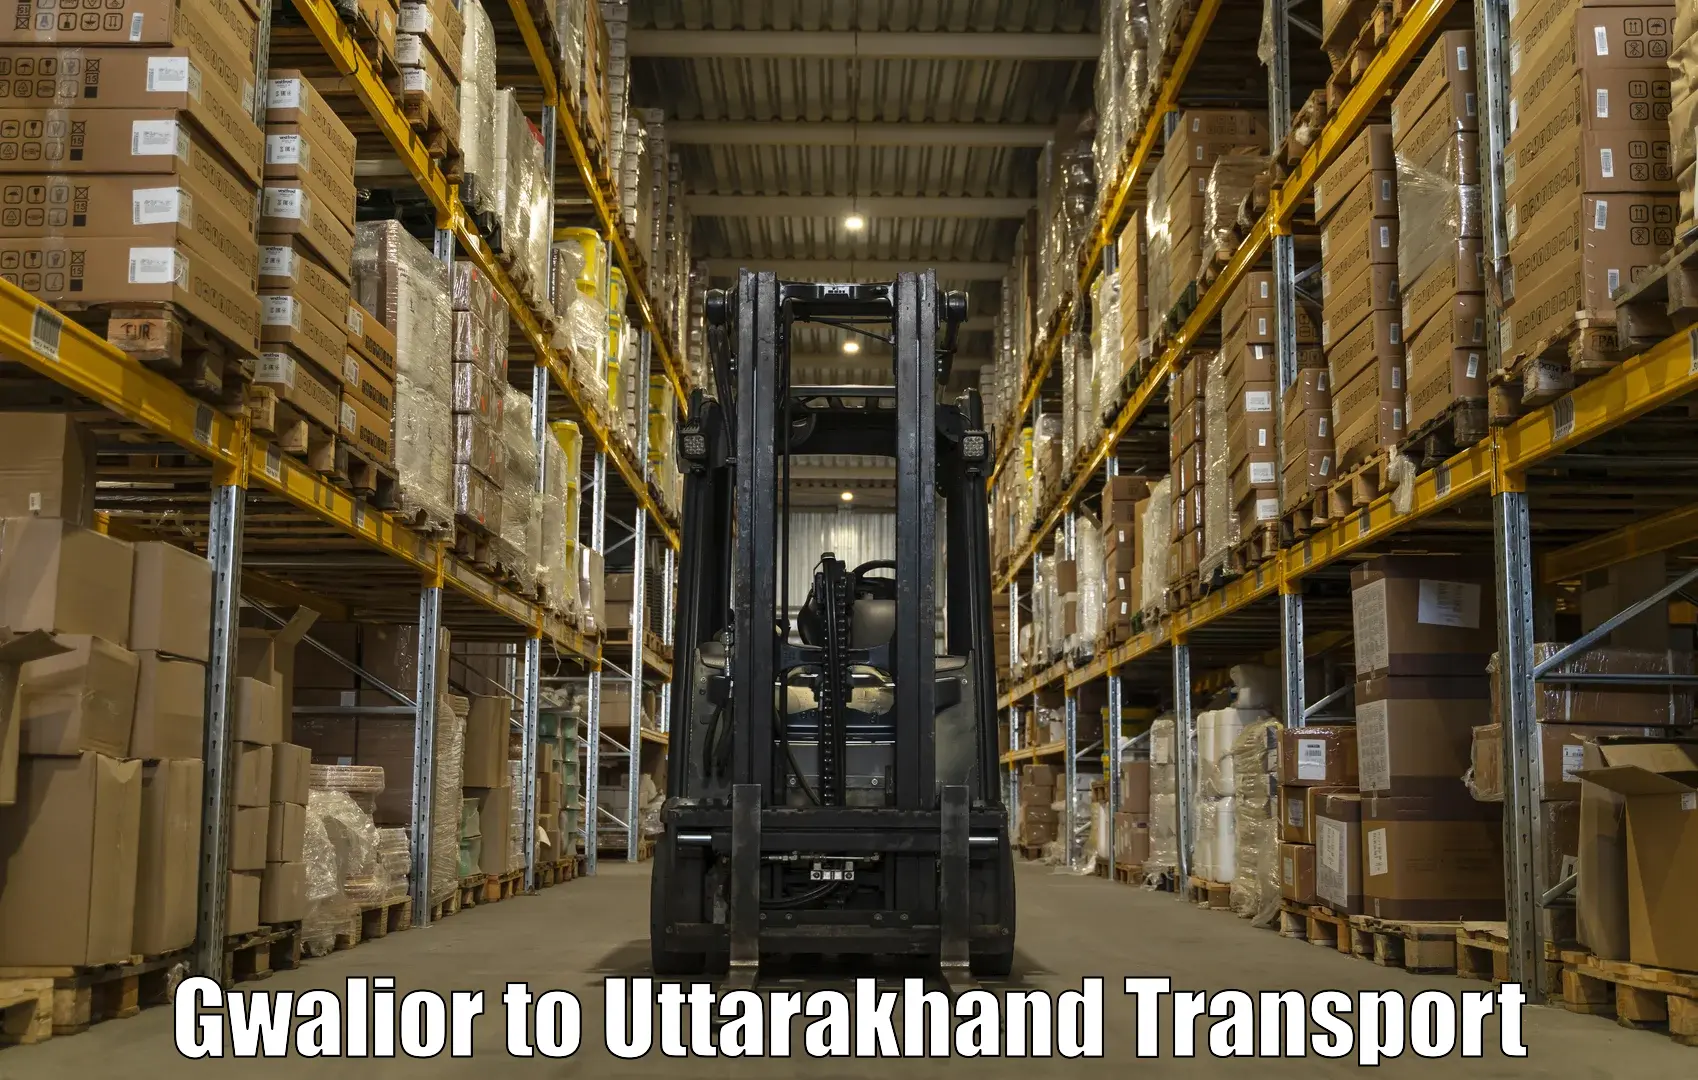 Truck transport companies in India Gwalior to Chamoli